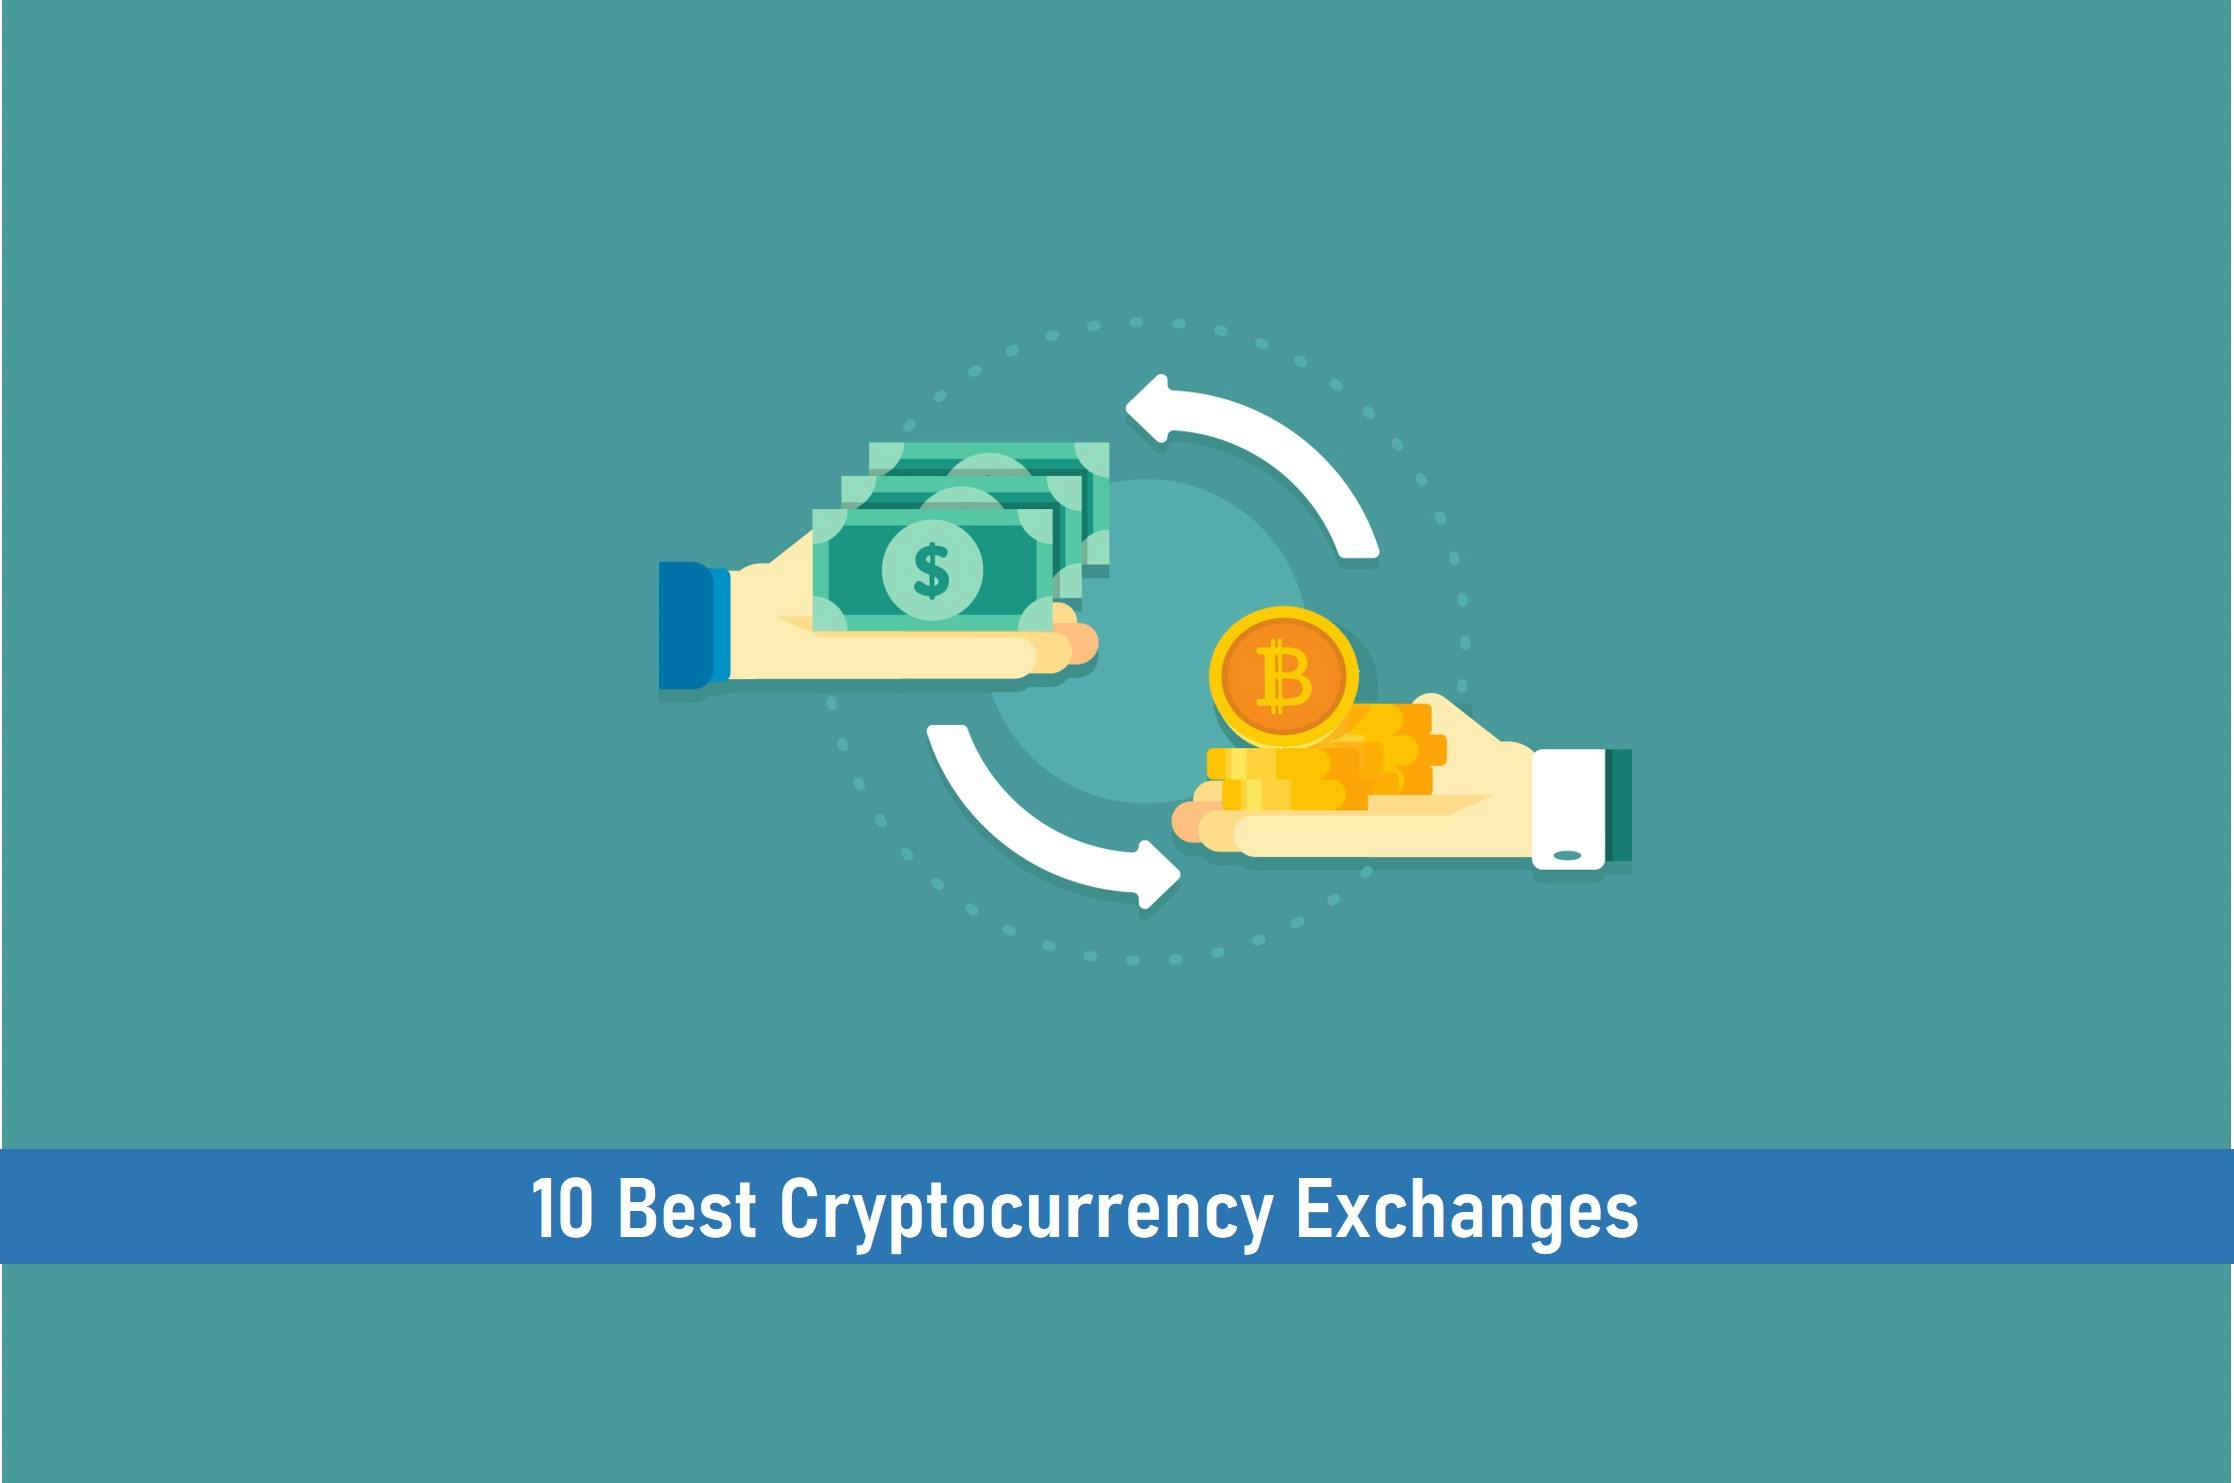 10 Best Cryptocurrency Exchanges in 2022